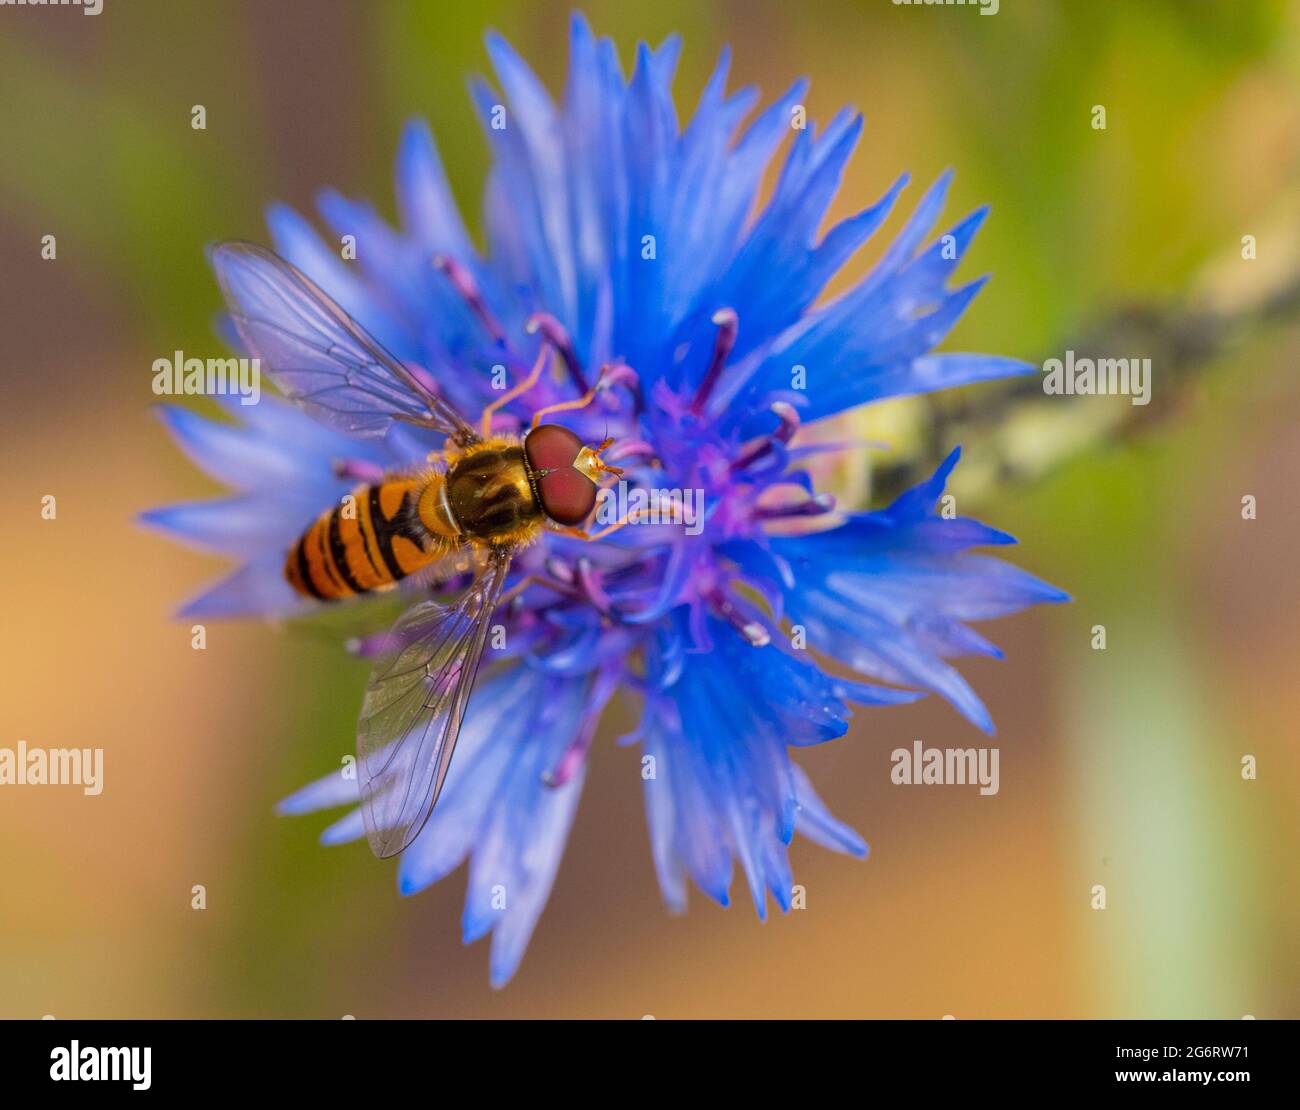 Hoverflies, syrphid flies, Hover Fly, on cornflowers, Bedfordshire, ROYAUME-UNI Banque D'Images